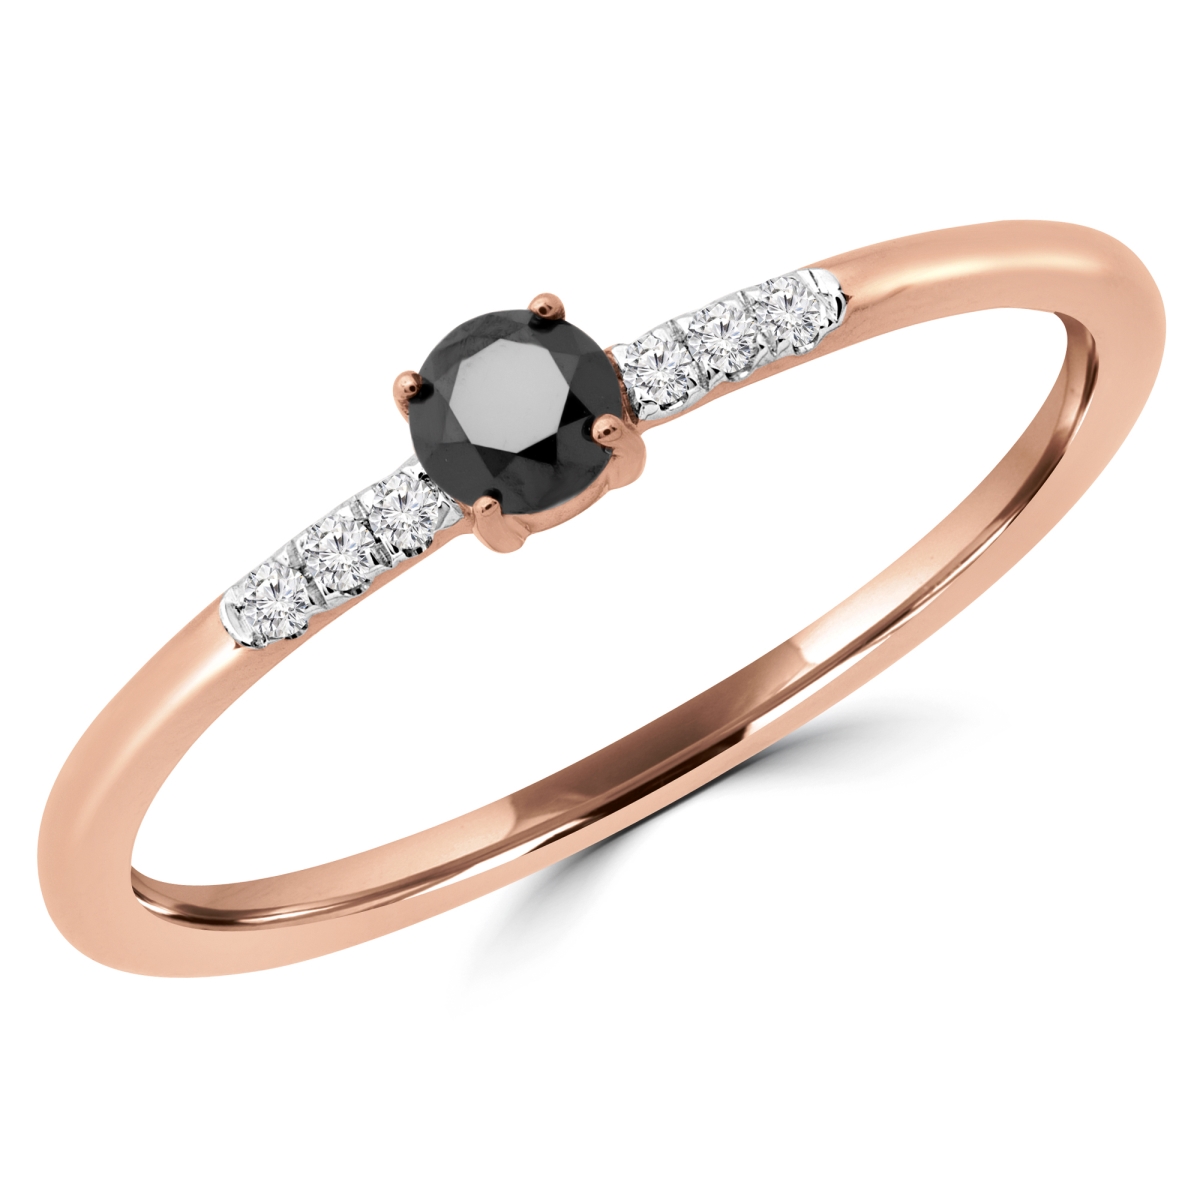 Picture of Majesty Diamonds MDR190079-7.25 0.16 CTW Round Black Diamond Bezel Set Cocktail Ring in 14K Rose Gold - Size 7.25